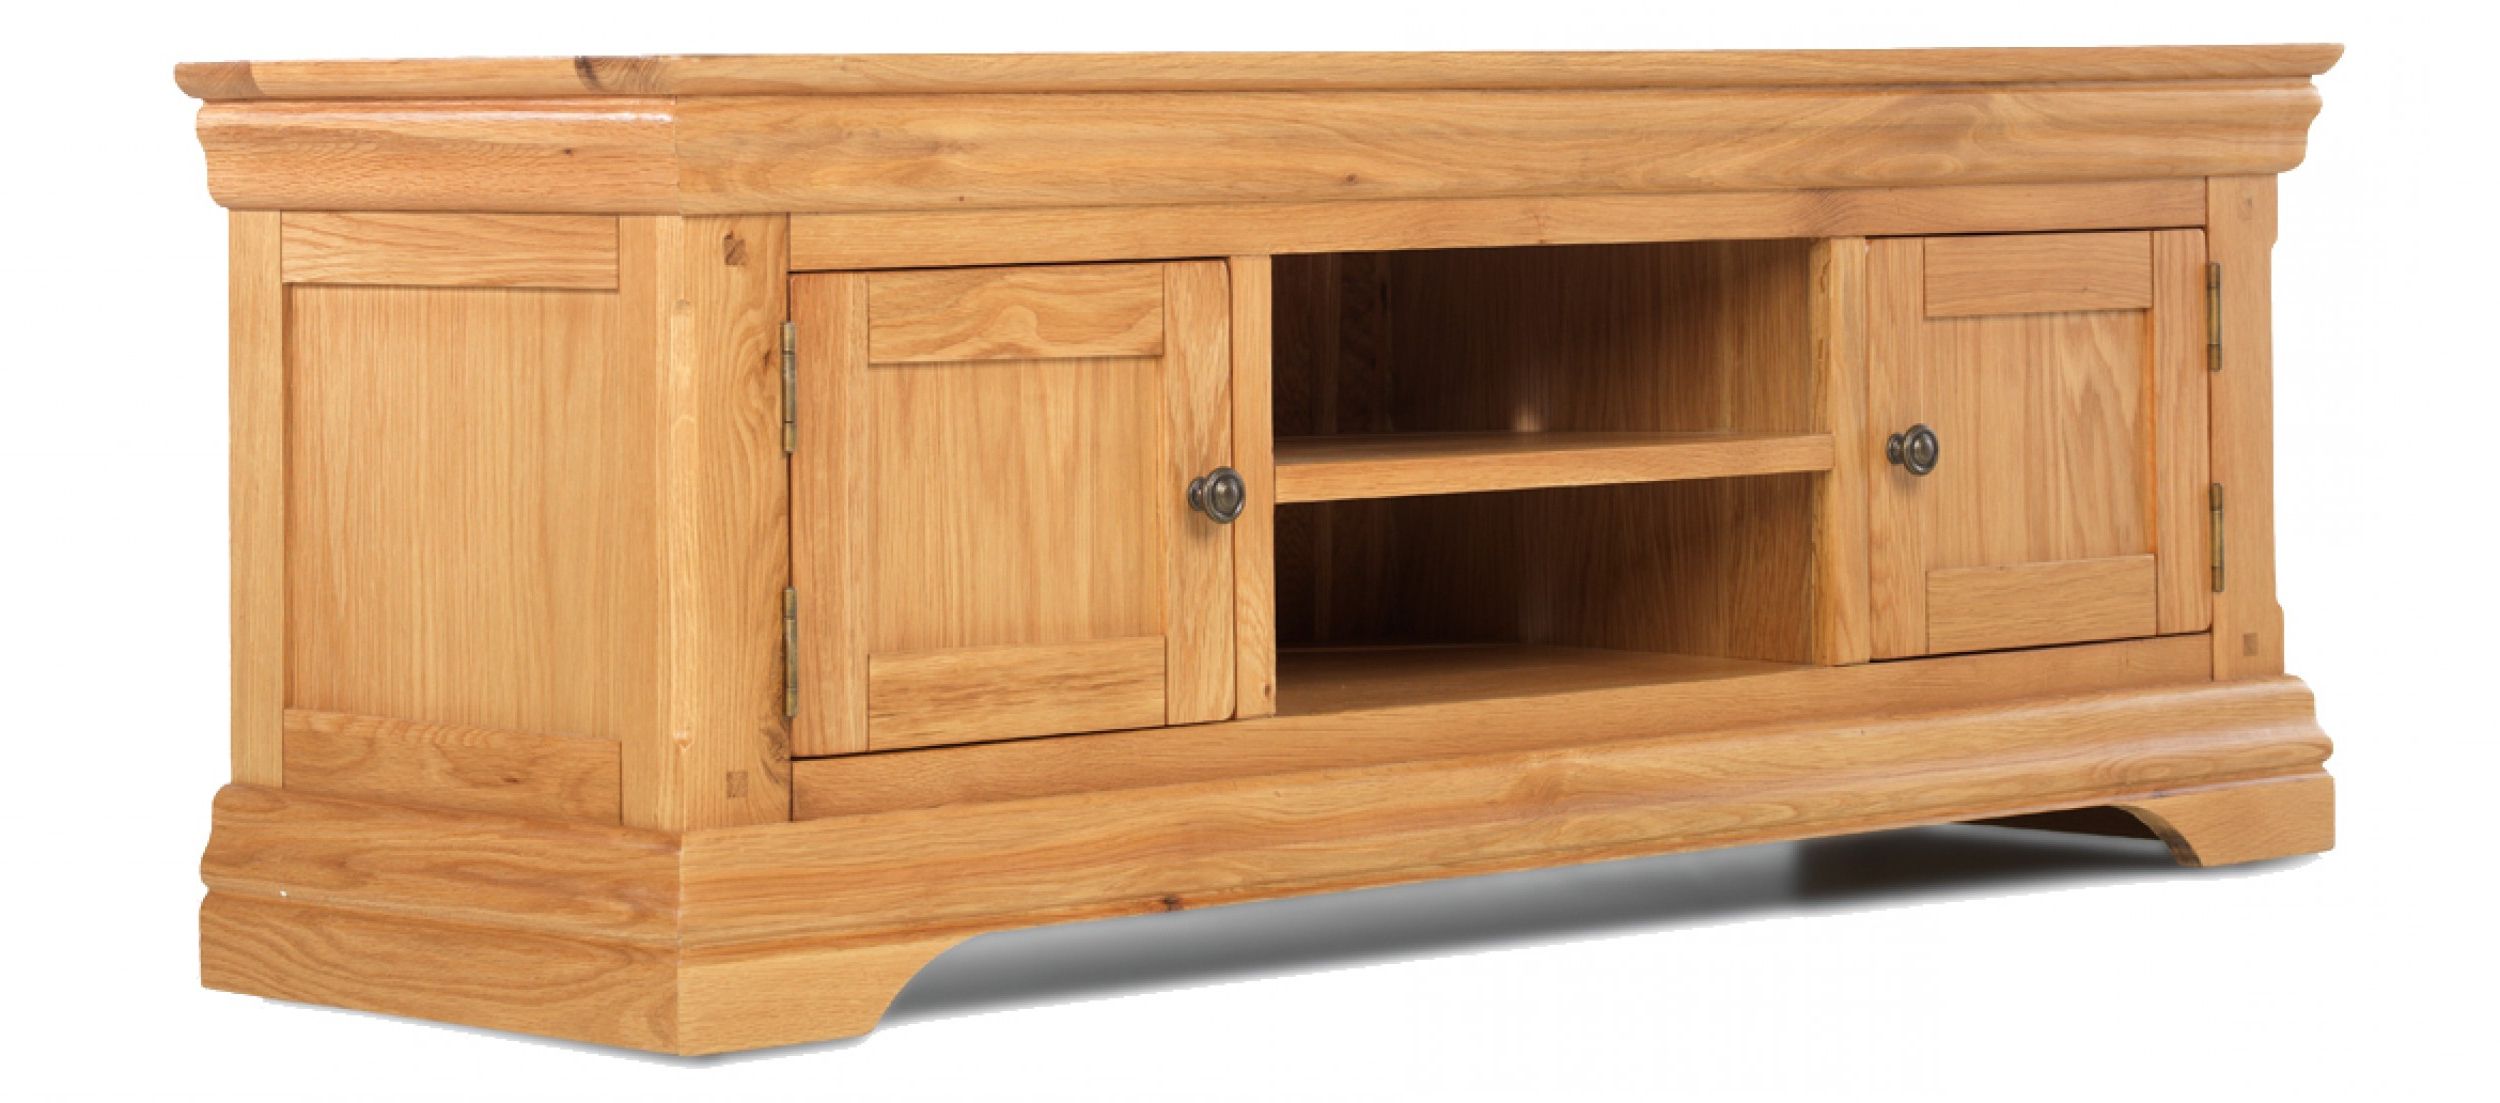 Most Recent Constance Oak Plasma Tv Stand (View 3 of 20)